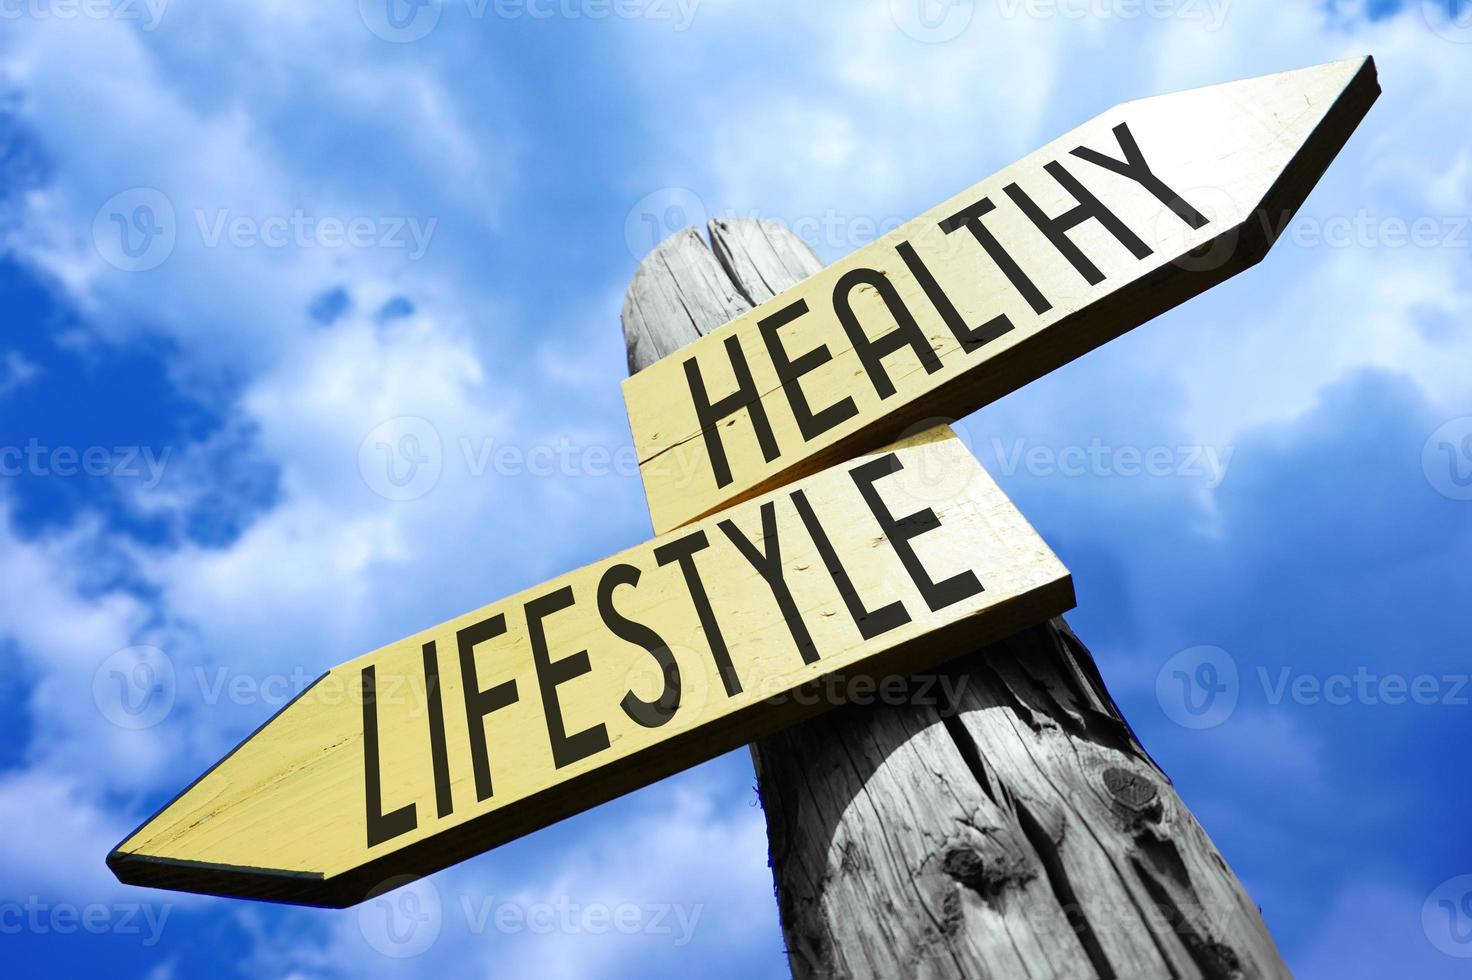 Healthy, Lifestyle - Wooden Signpost with Two Arrows and Sky in Background photo